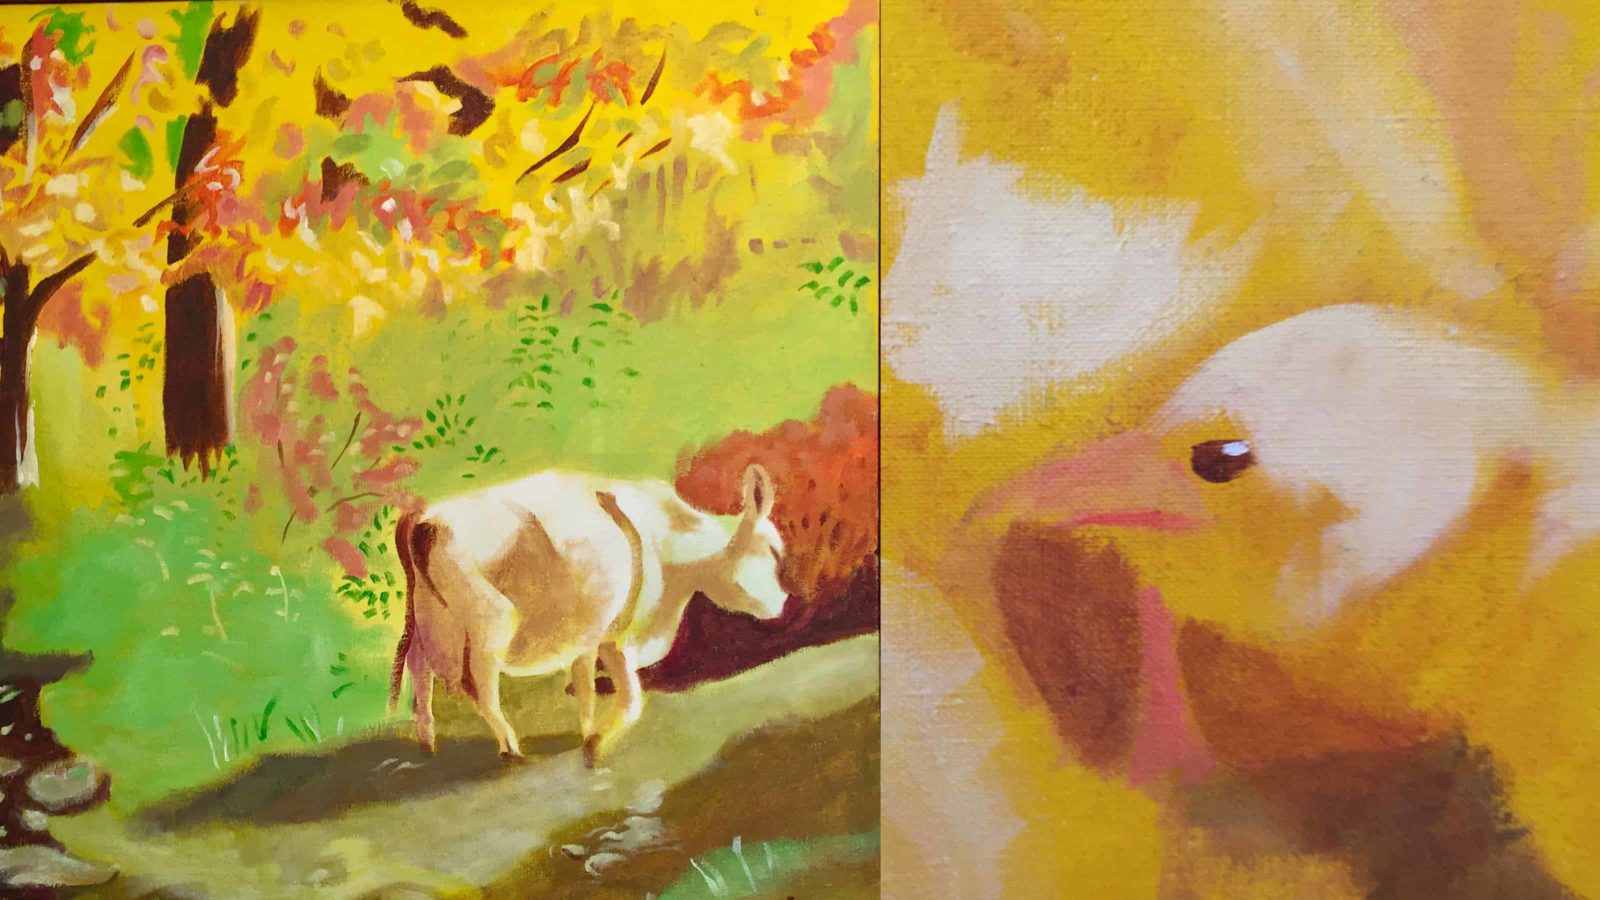 Susan Merrill's paintings of chicks and cows in a late summer field appeared in an exhibit at Hancock Shaker Village in 2016.